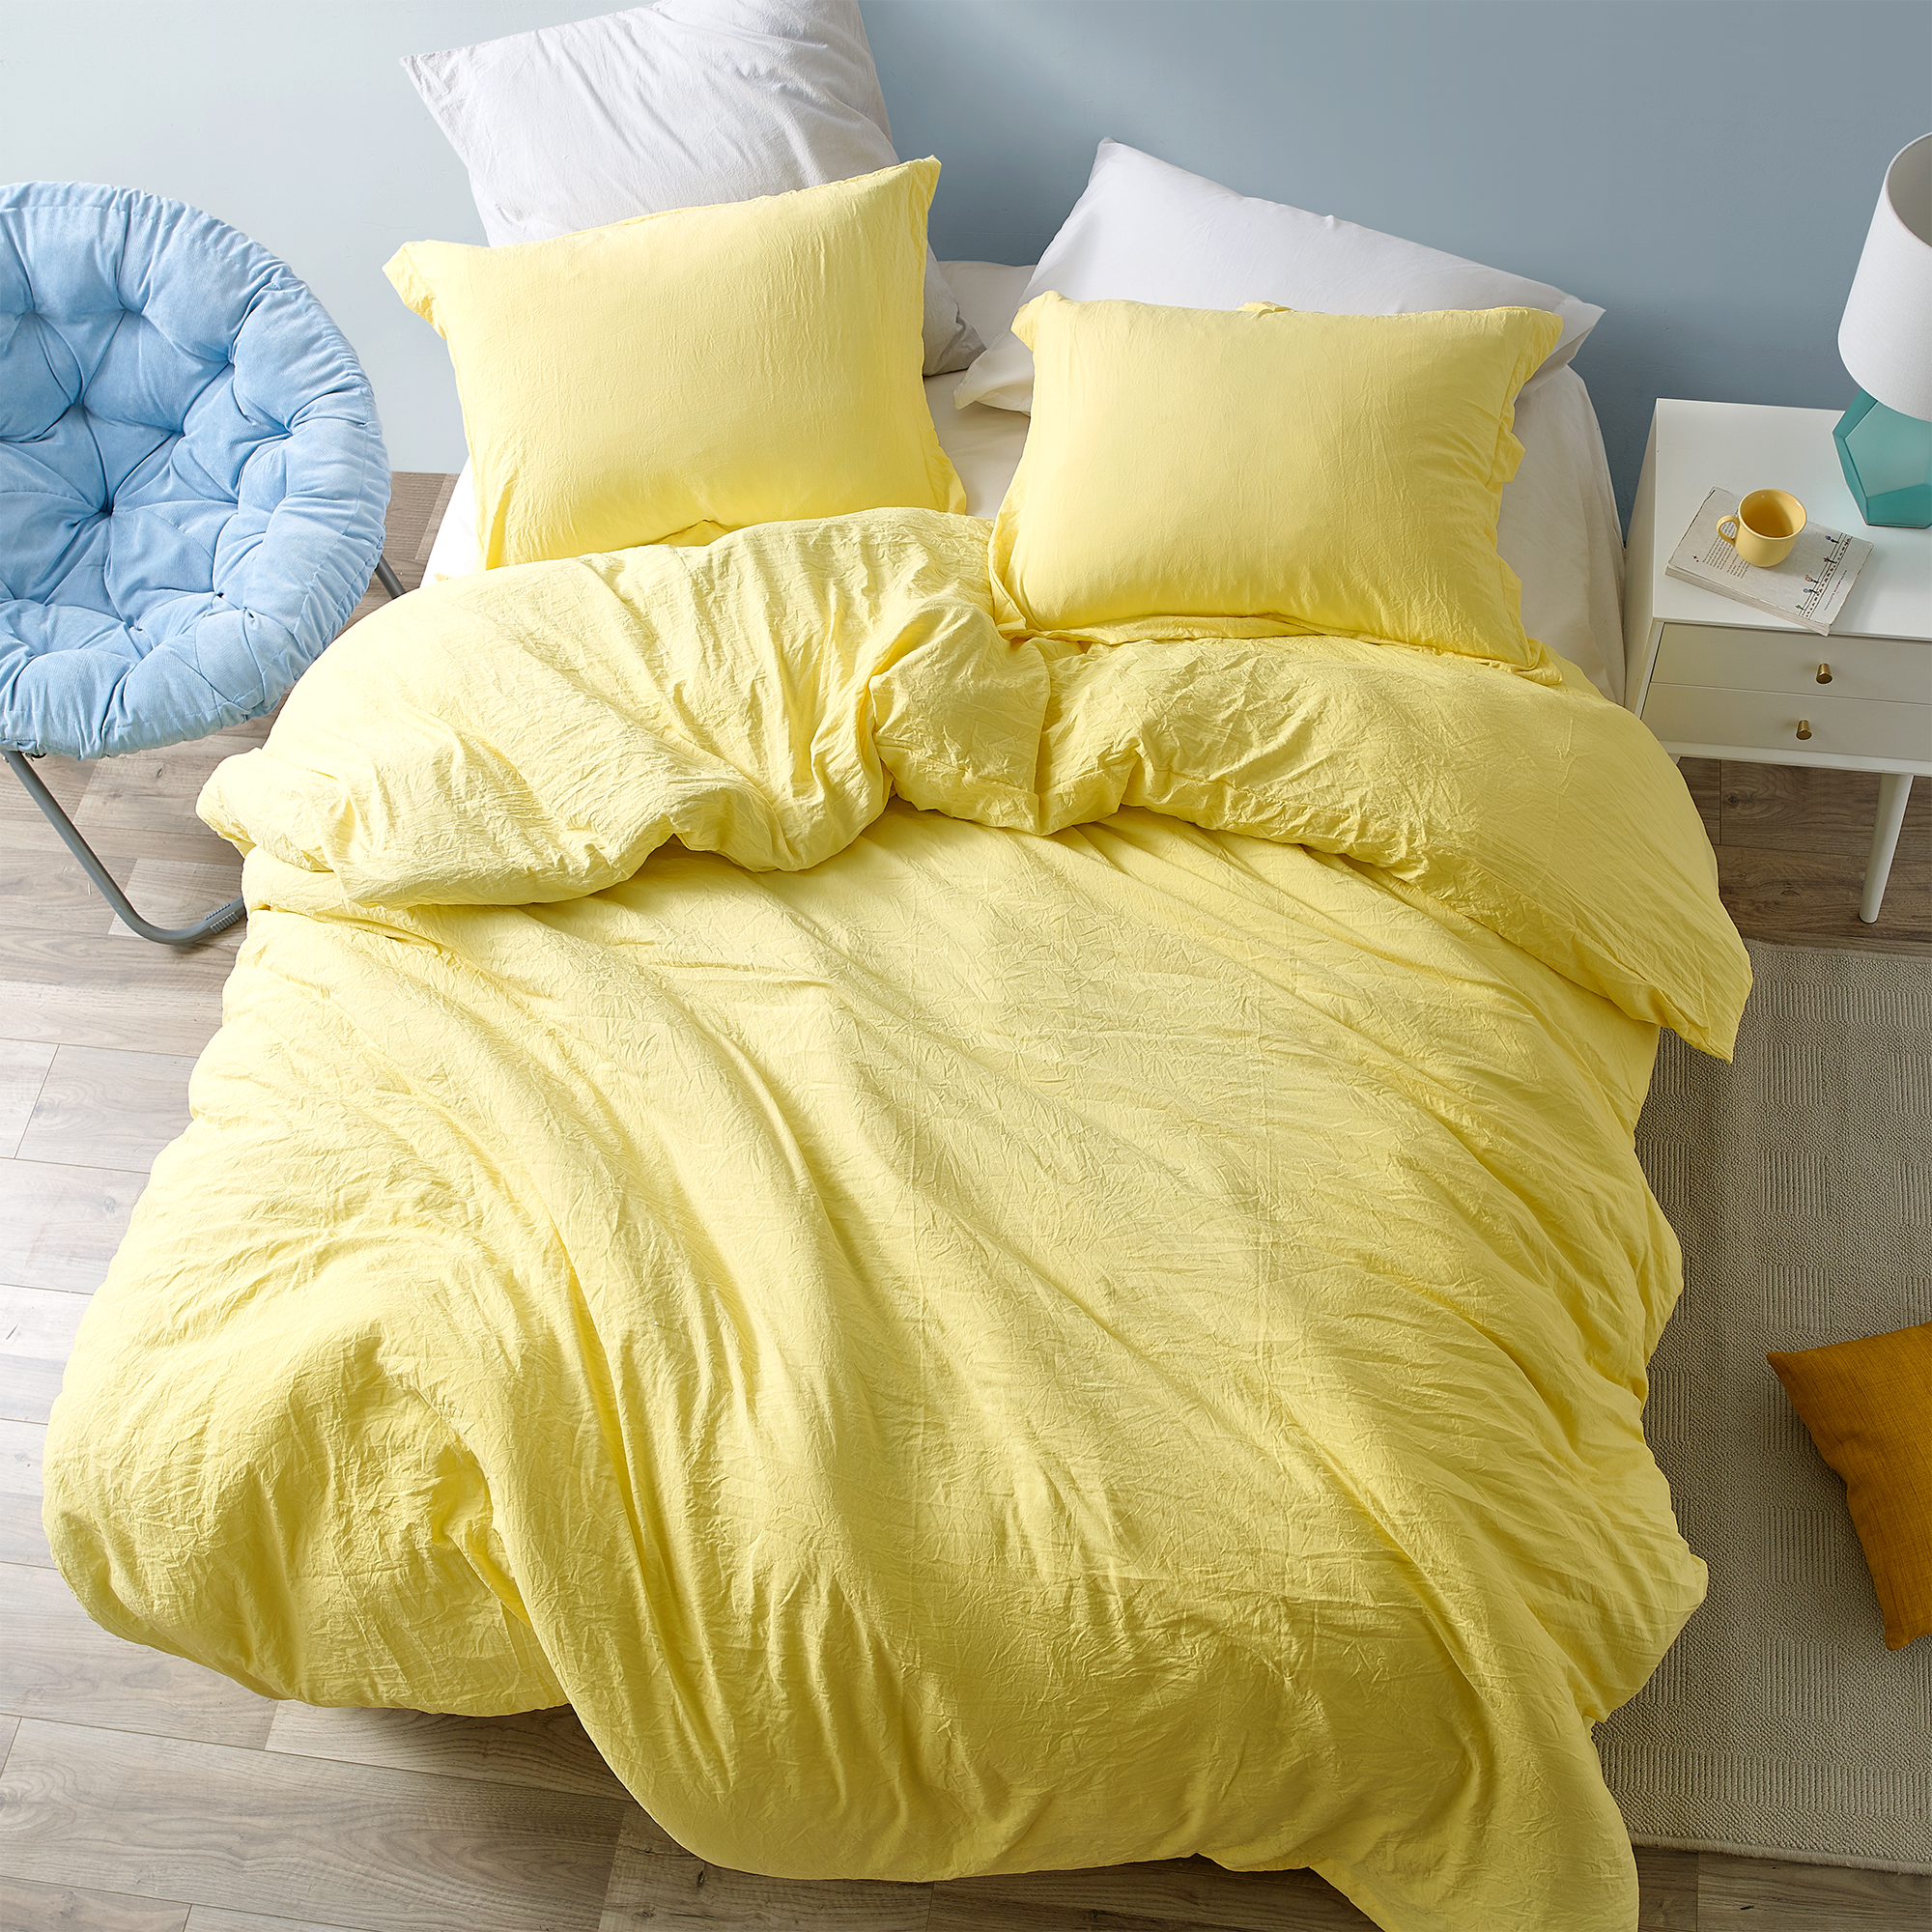 Chommie - Weighted Natural Loft® Comforter - Limelight Yellow